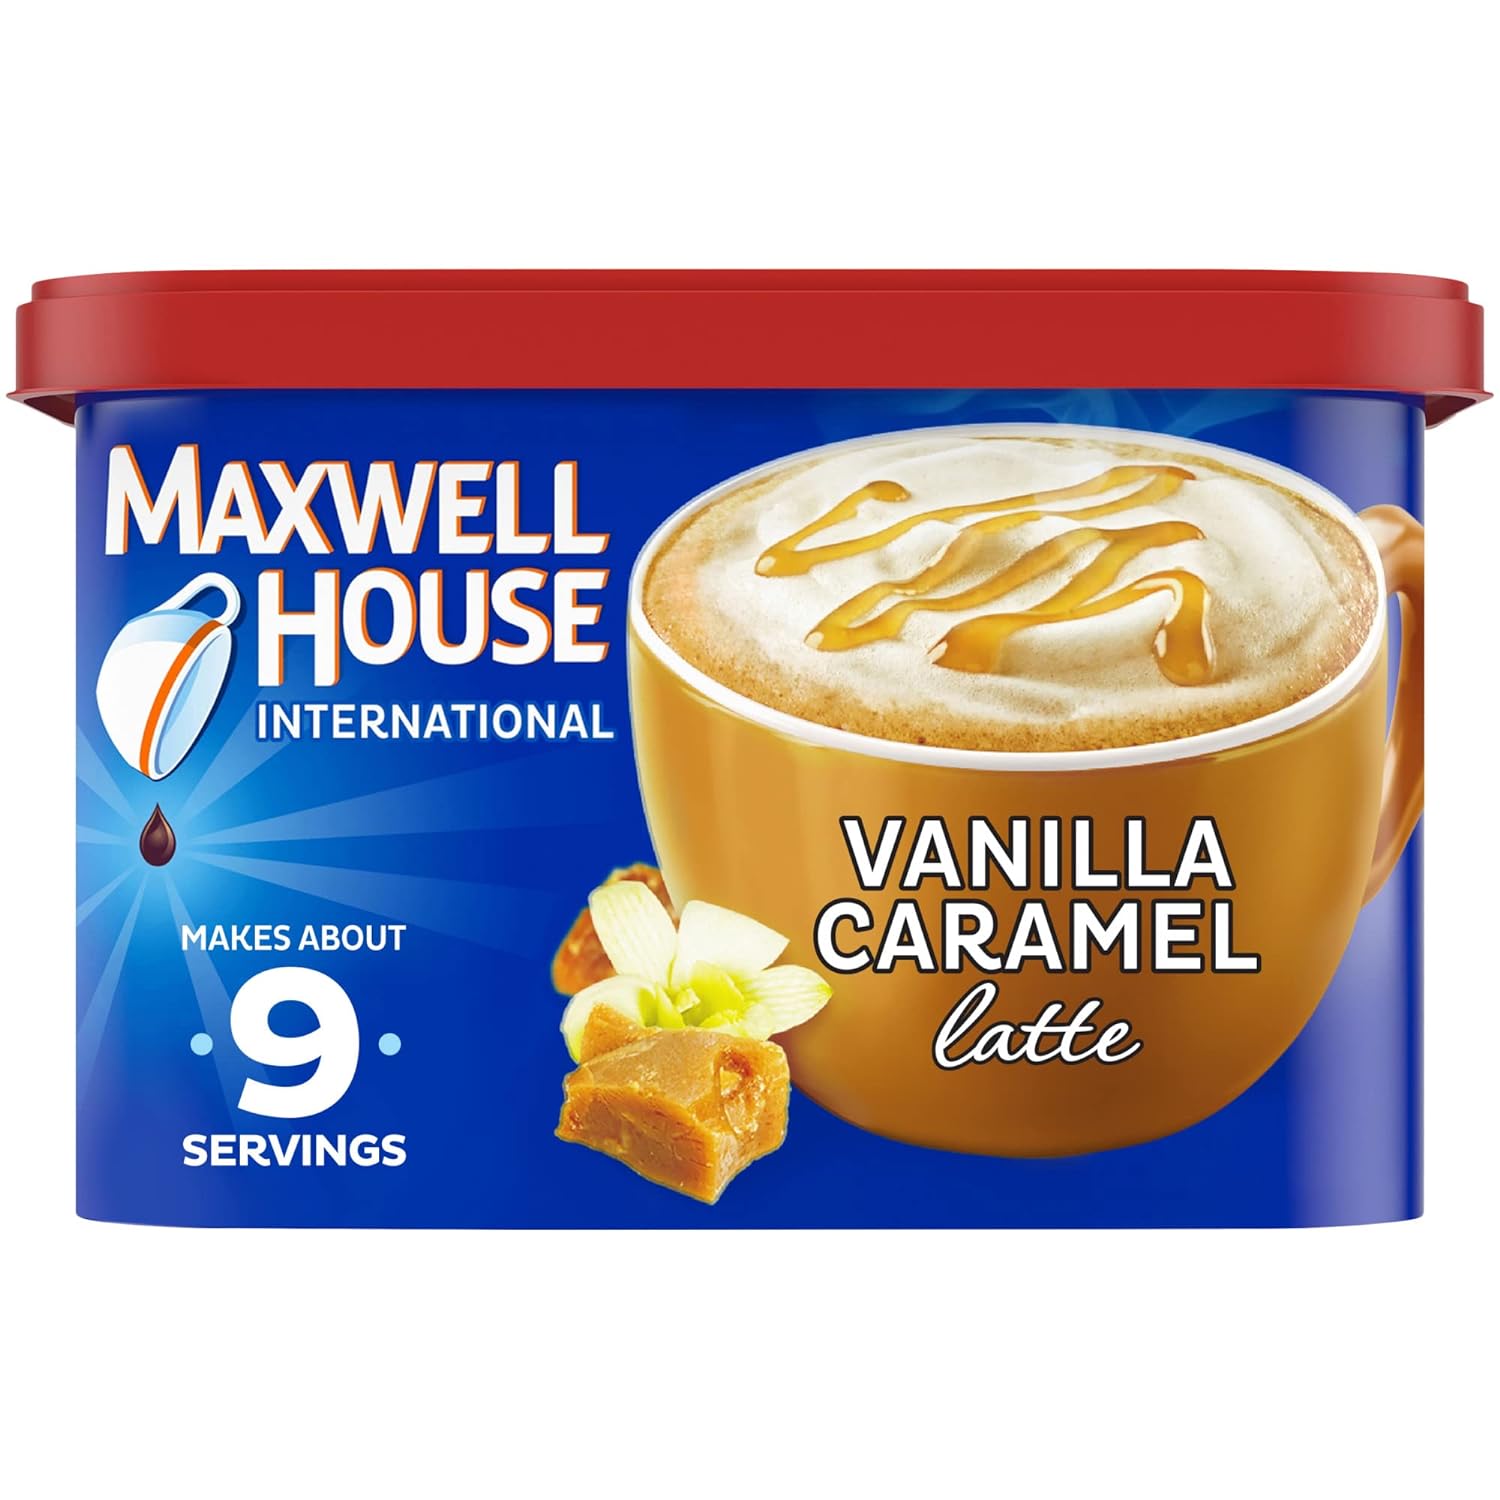 As a coffee enthusiast, I'm always on the lookout for new and exciting flavors to try. When I came across Maxwell House Sugar-Free Naturally Decaffeinated Suisse Mocha Coffee Drink Mix, I was intrigued by the combination of chocolate and coffee. I decided to give it a try and I'm so glad I did!The flavor of this coffee drink is absolutely delicious. It' sweet and chocolatey, but not too sweet. The coffee flavor is also very strong, and it comes through nicely in the mix. I was also impressed wi